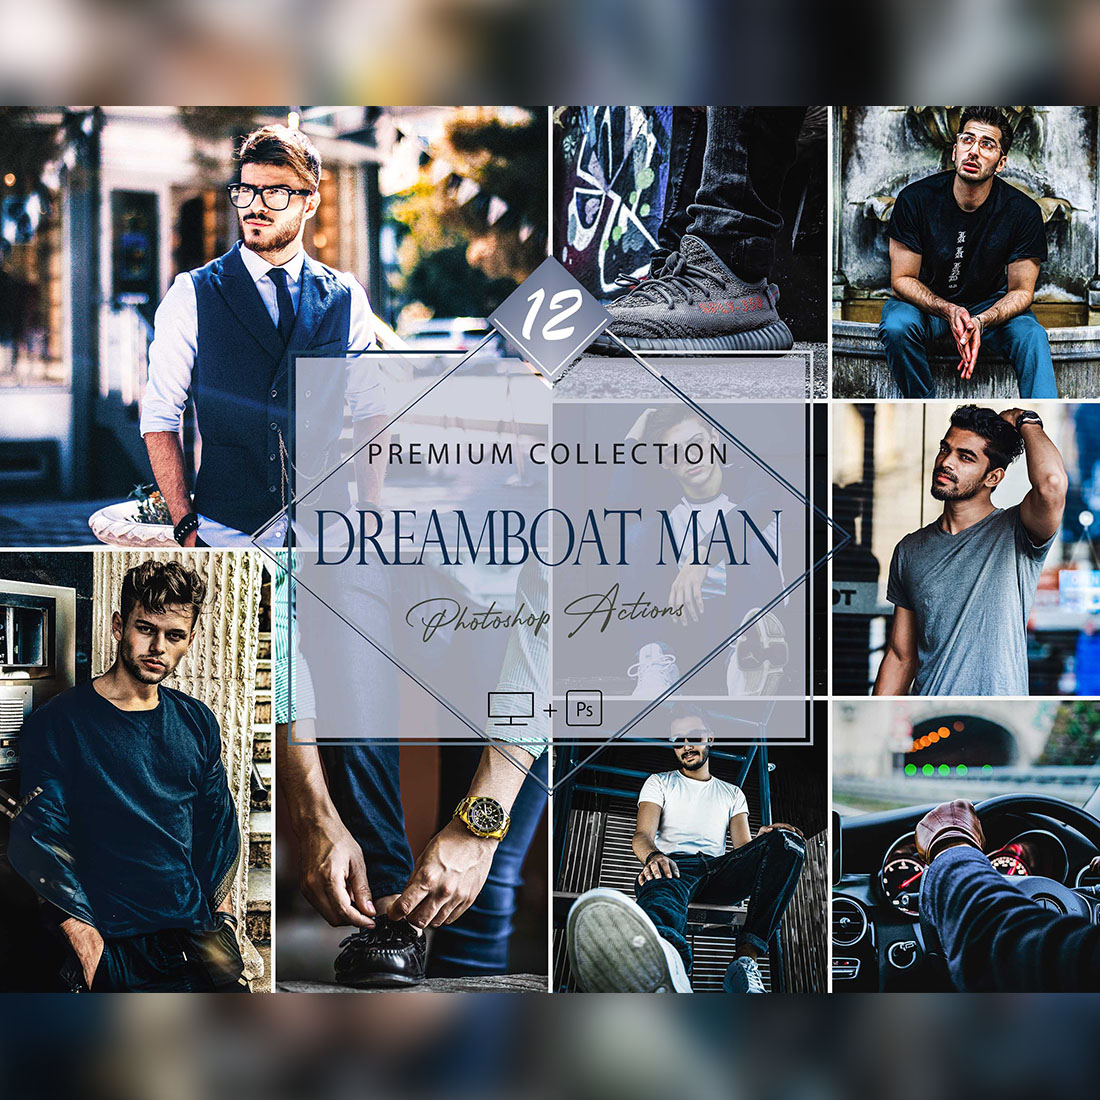 12 Photoshop Actions, Dreamboat Man Ps Action, Hue HDR ACR Preset, Saturation Filter, monotone And Lifestyle Theme For Instagram, Men Blogger, Bronze portrait cover image.